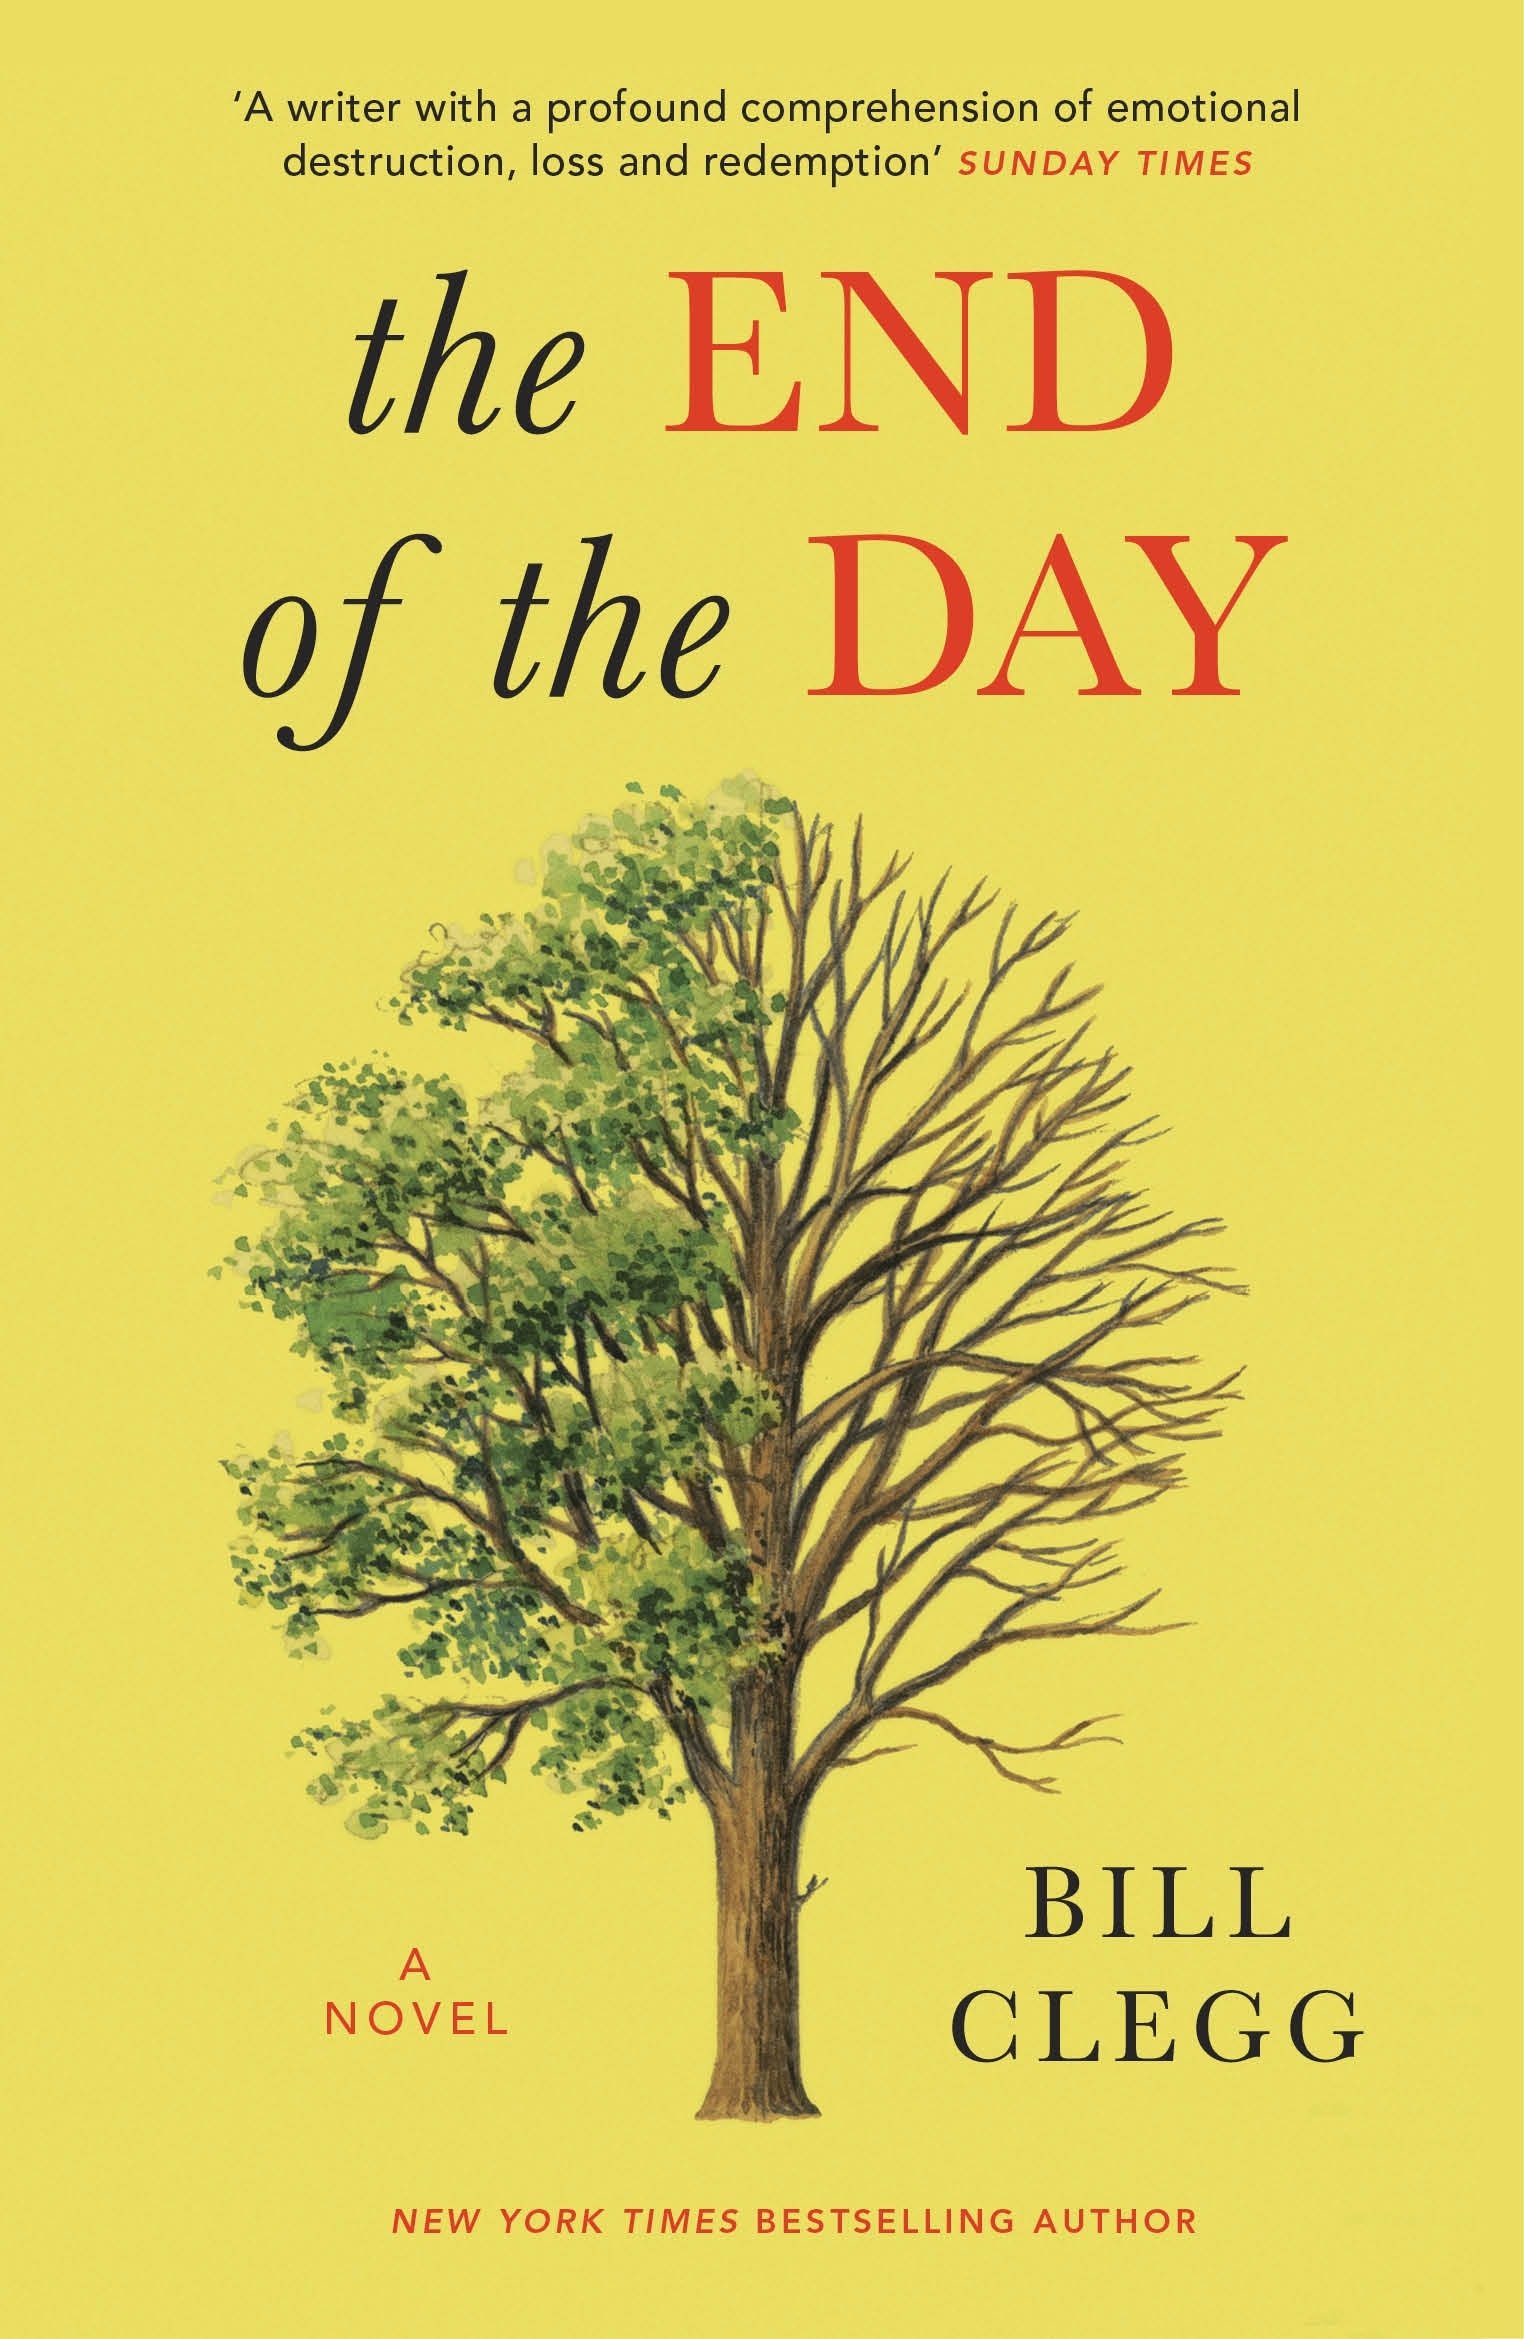 Book “The End of the Day” by Bill Clegg — October 7, 2021